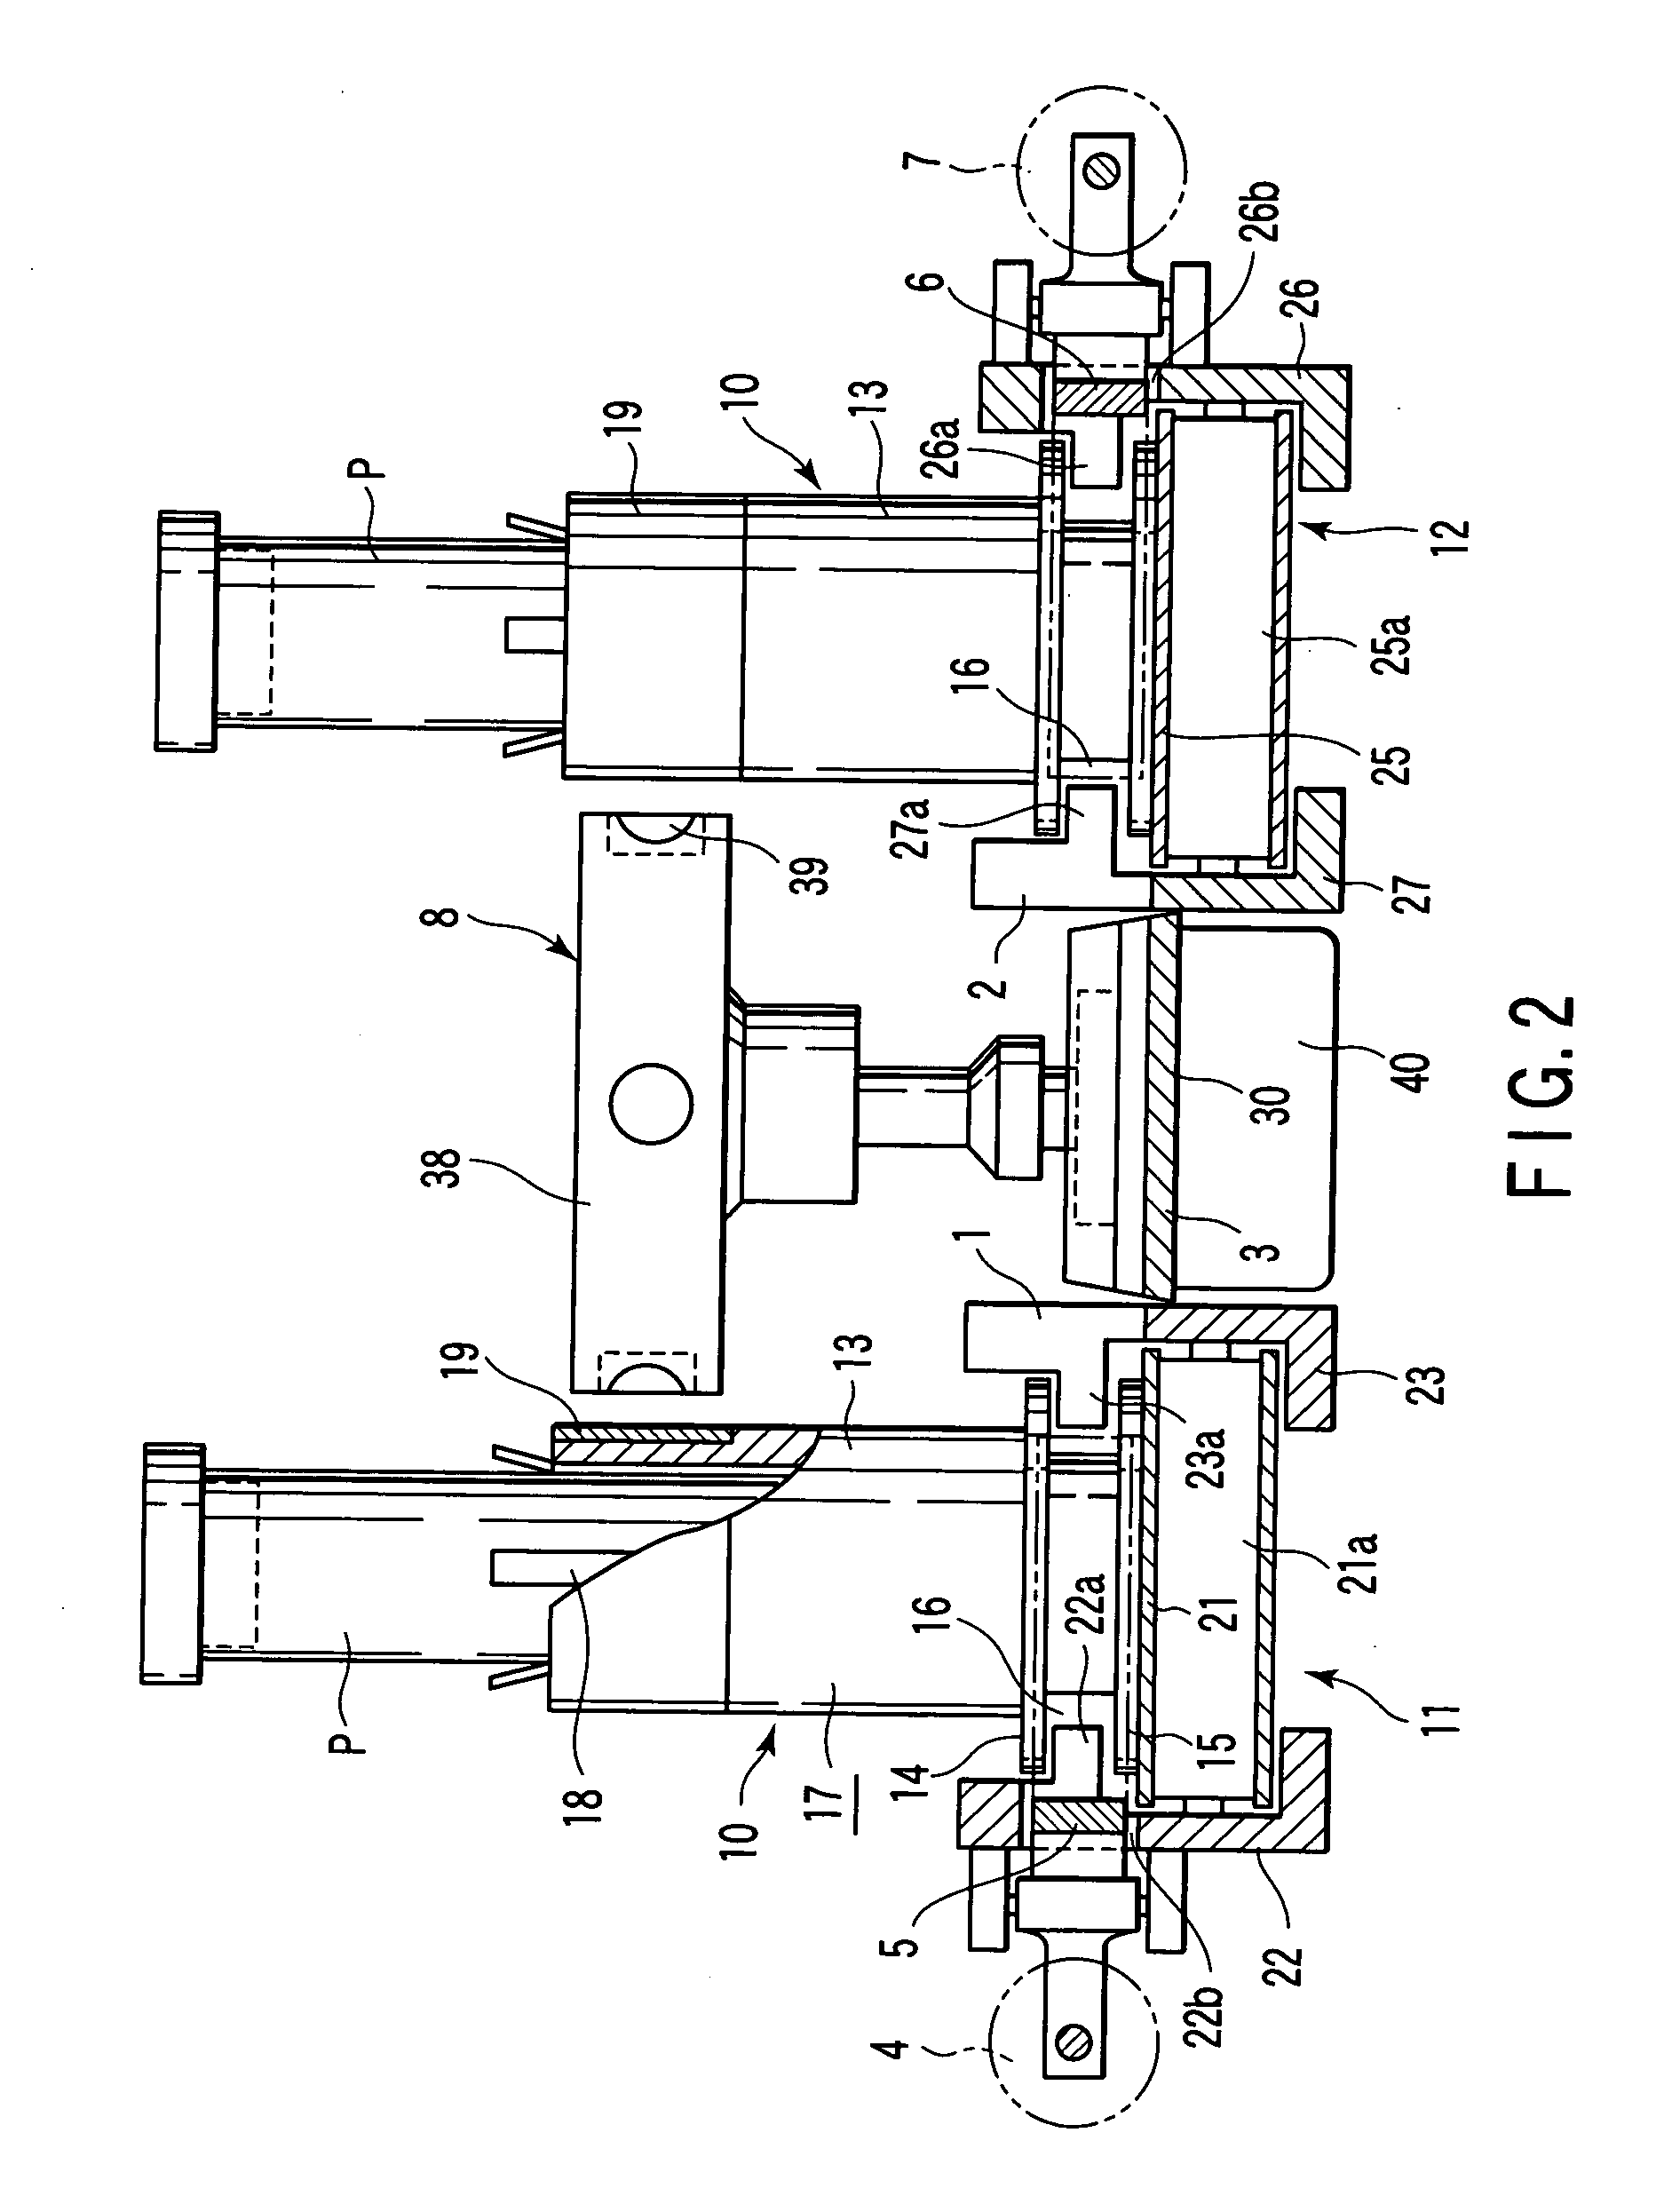 Carriage direction switching apparatus for test-tube carrier path